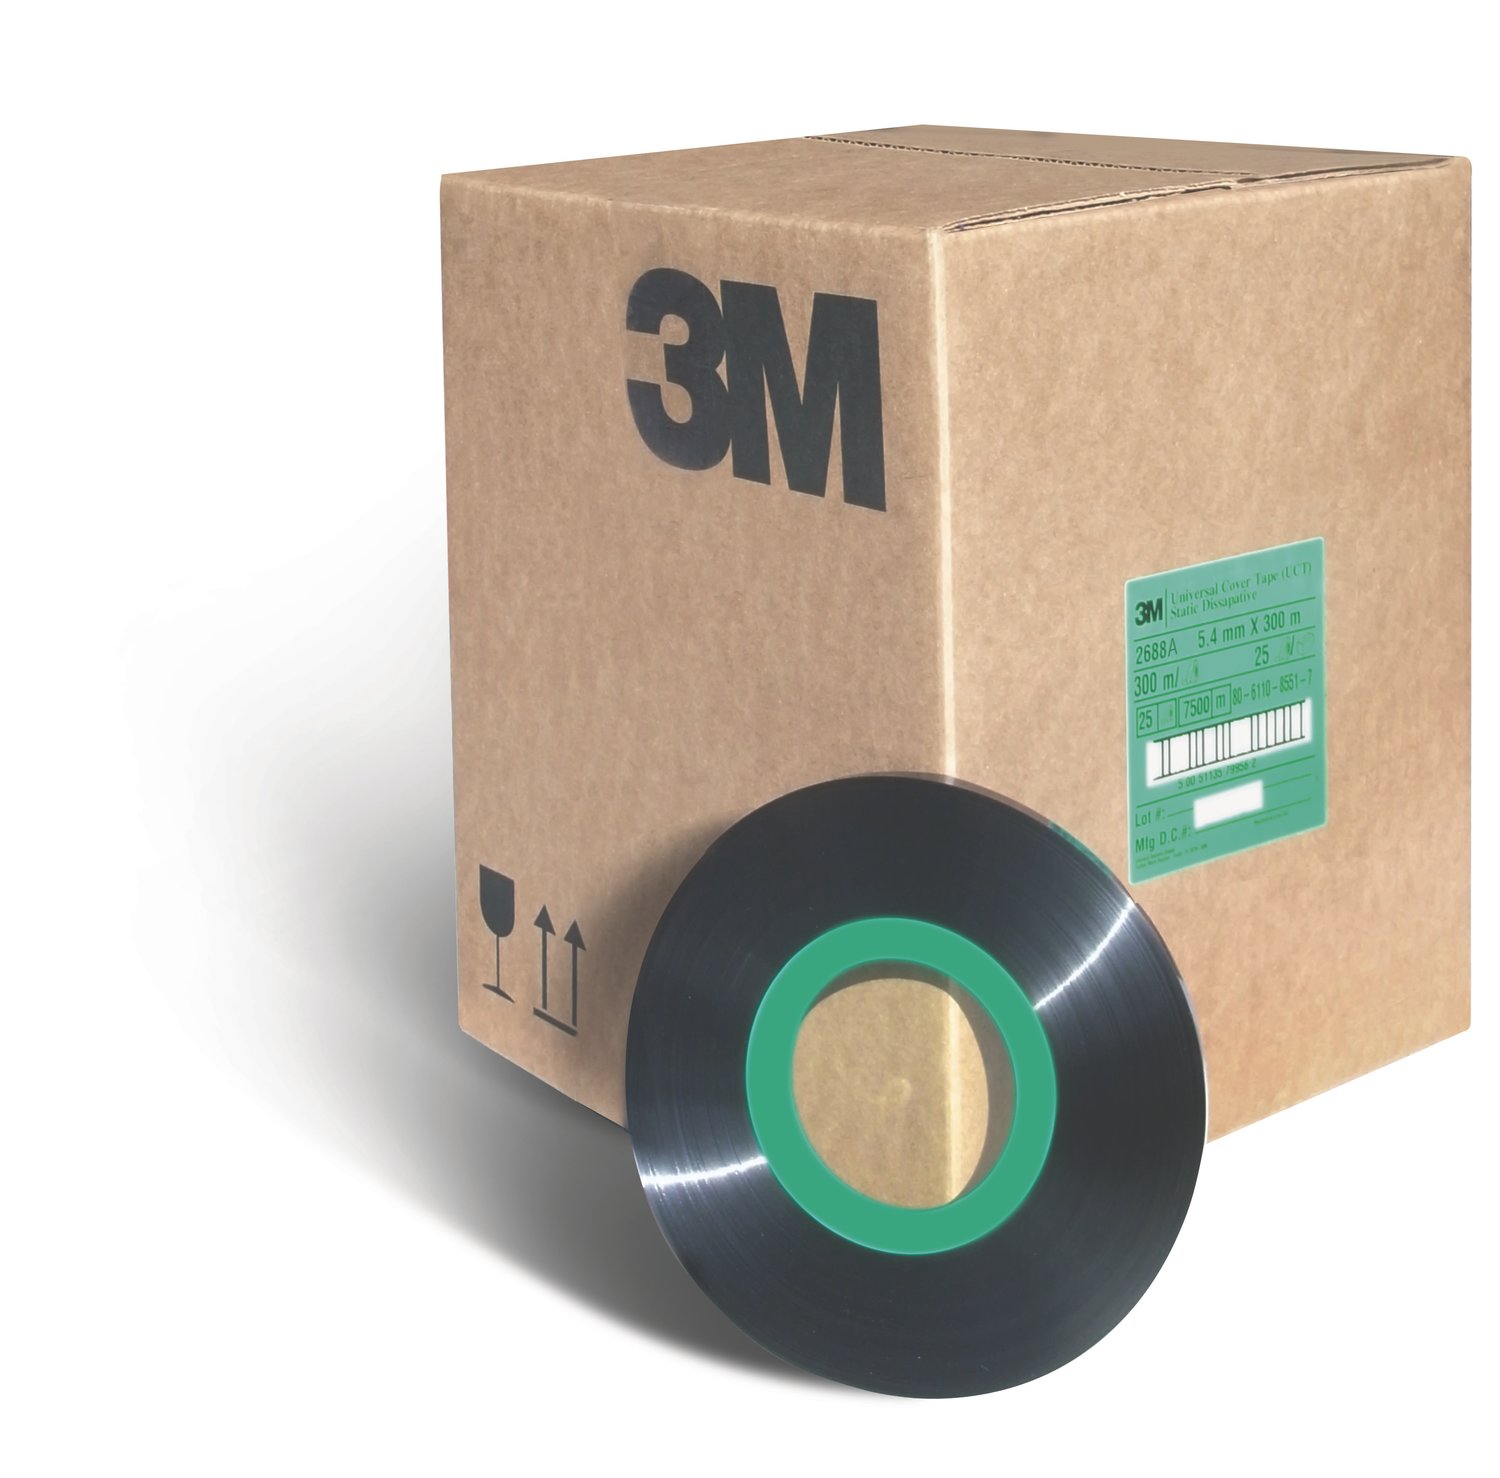 7100157890 - 3M Universal Cover Tape (UCT) 2688A, 2D Pack, 5.4 mm x 300 m, 25 Rolls/Case